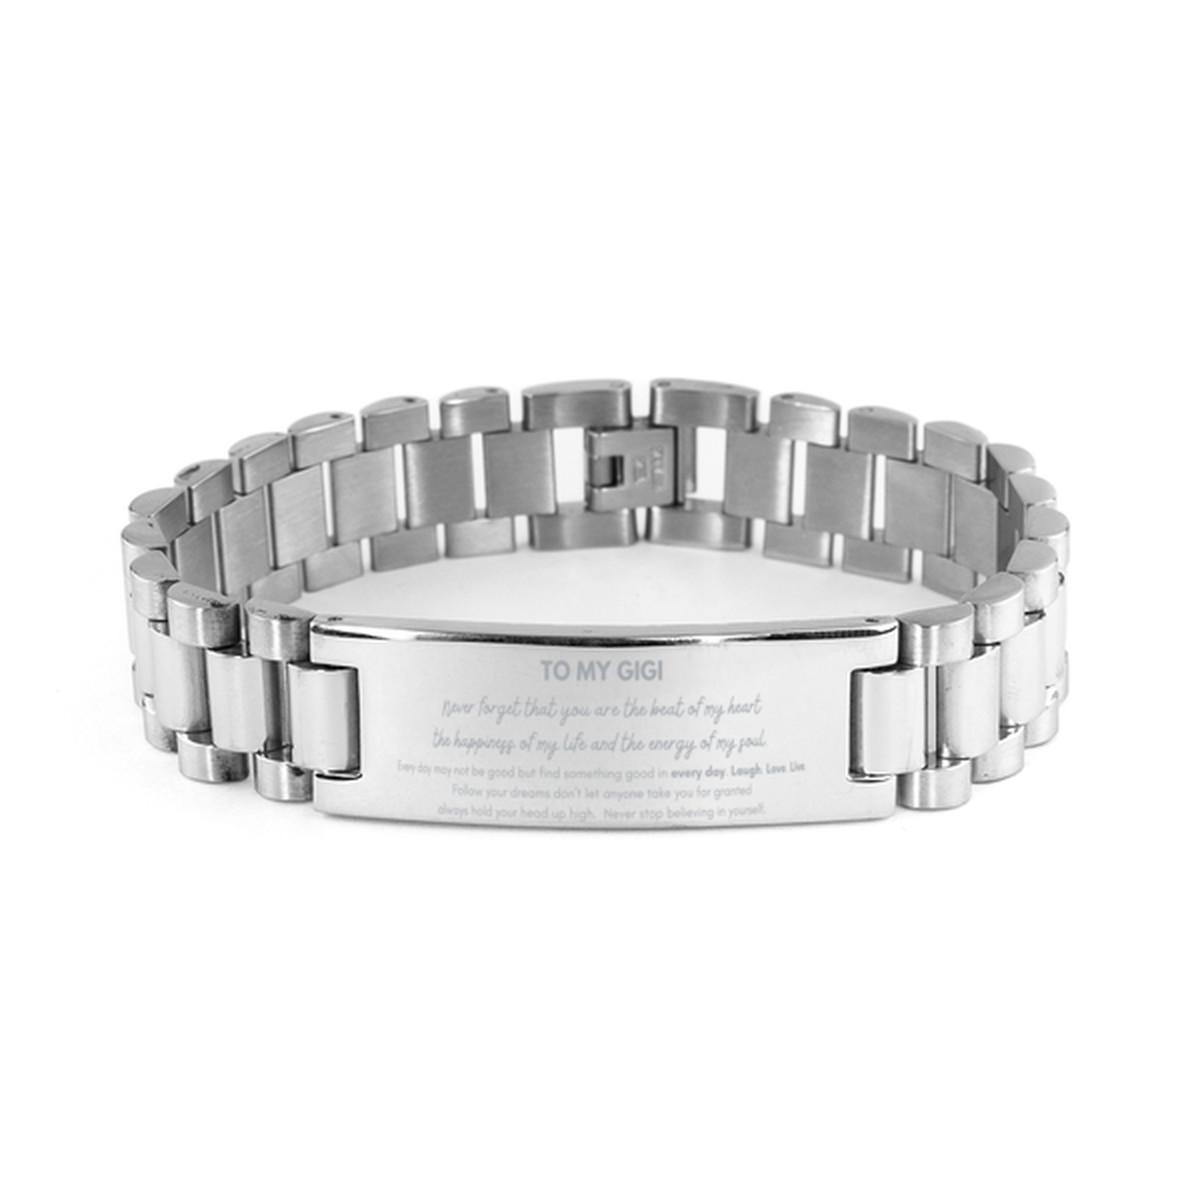 To My Gigi Bracelet Gifts, Christmas Gigi Ladder Stainless Steel Bracelet Present, Birthday Unique Motivational For Gigi, To My Gigi Never forget that you are the beat of my heart the happiness of my life and the energy of my soul